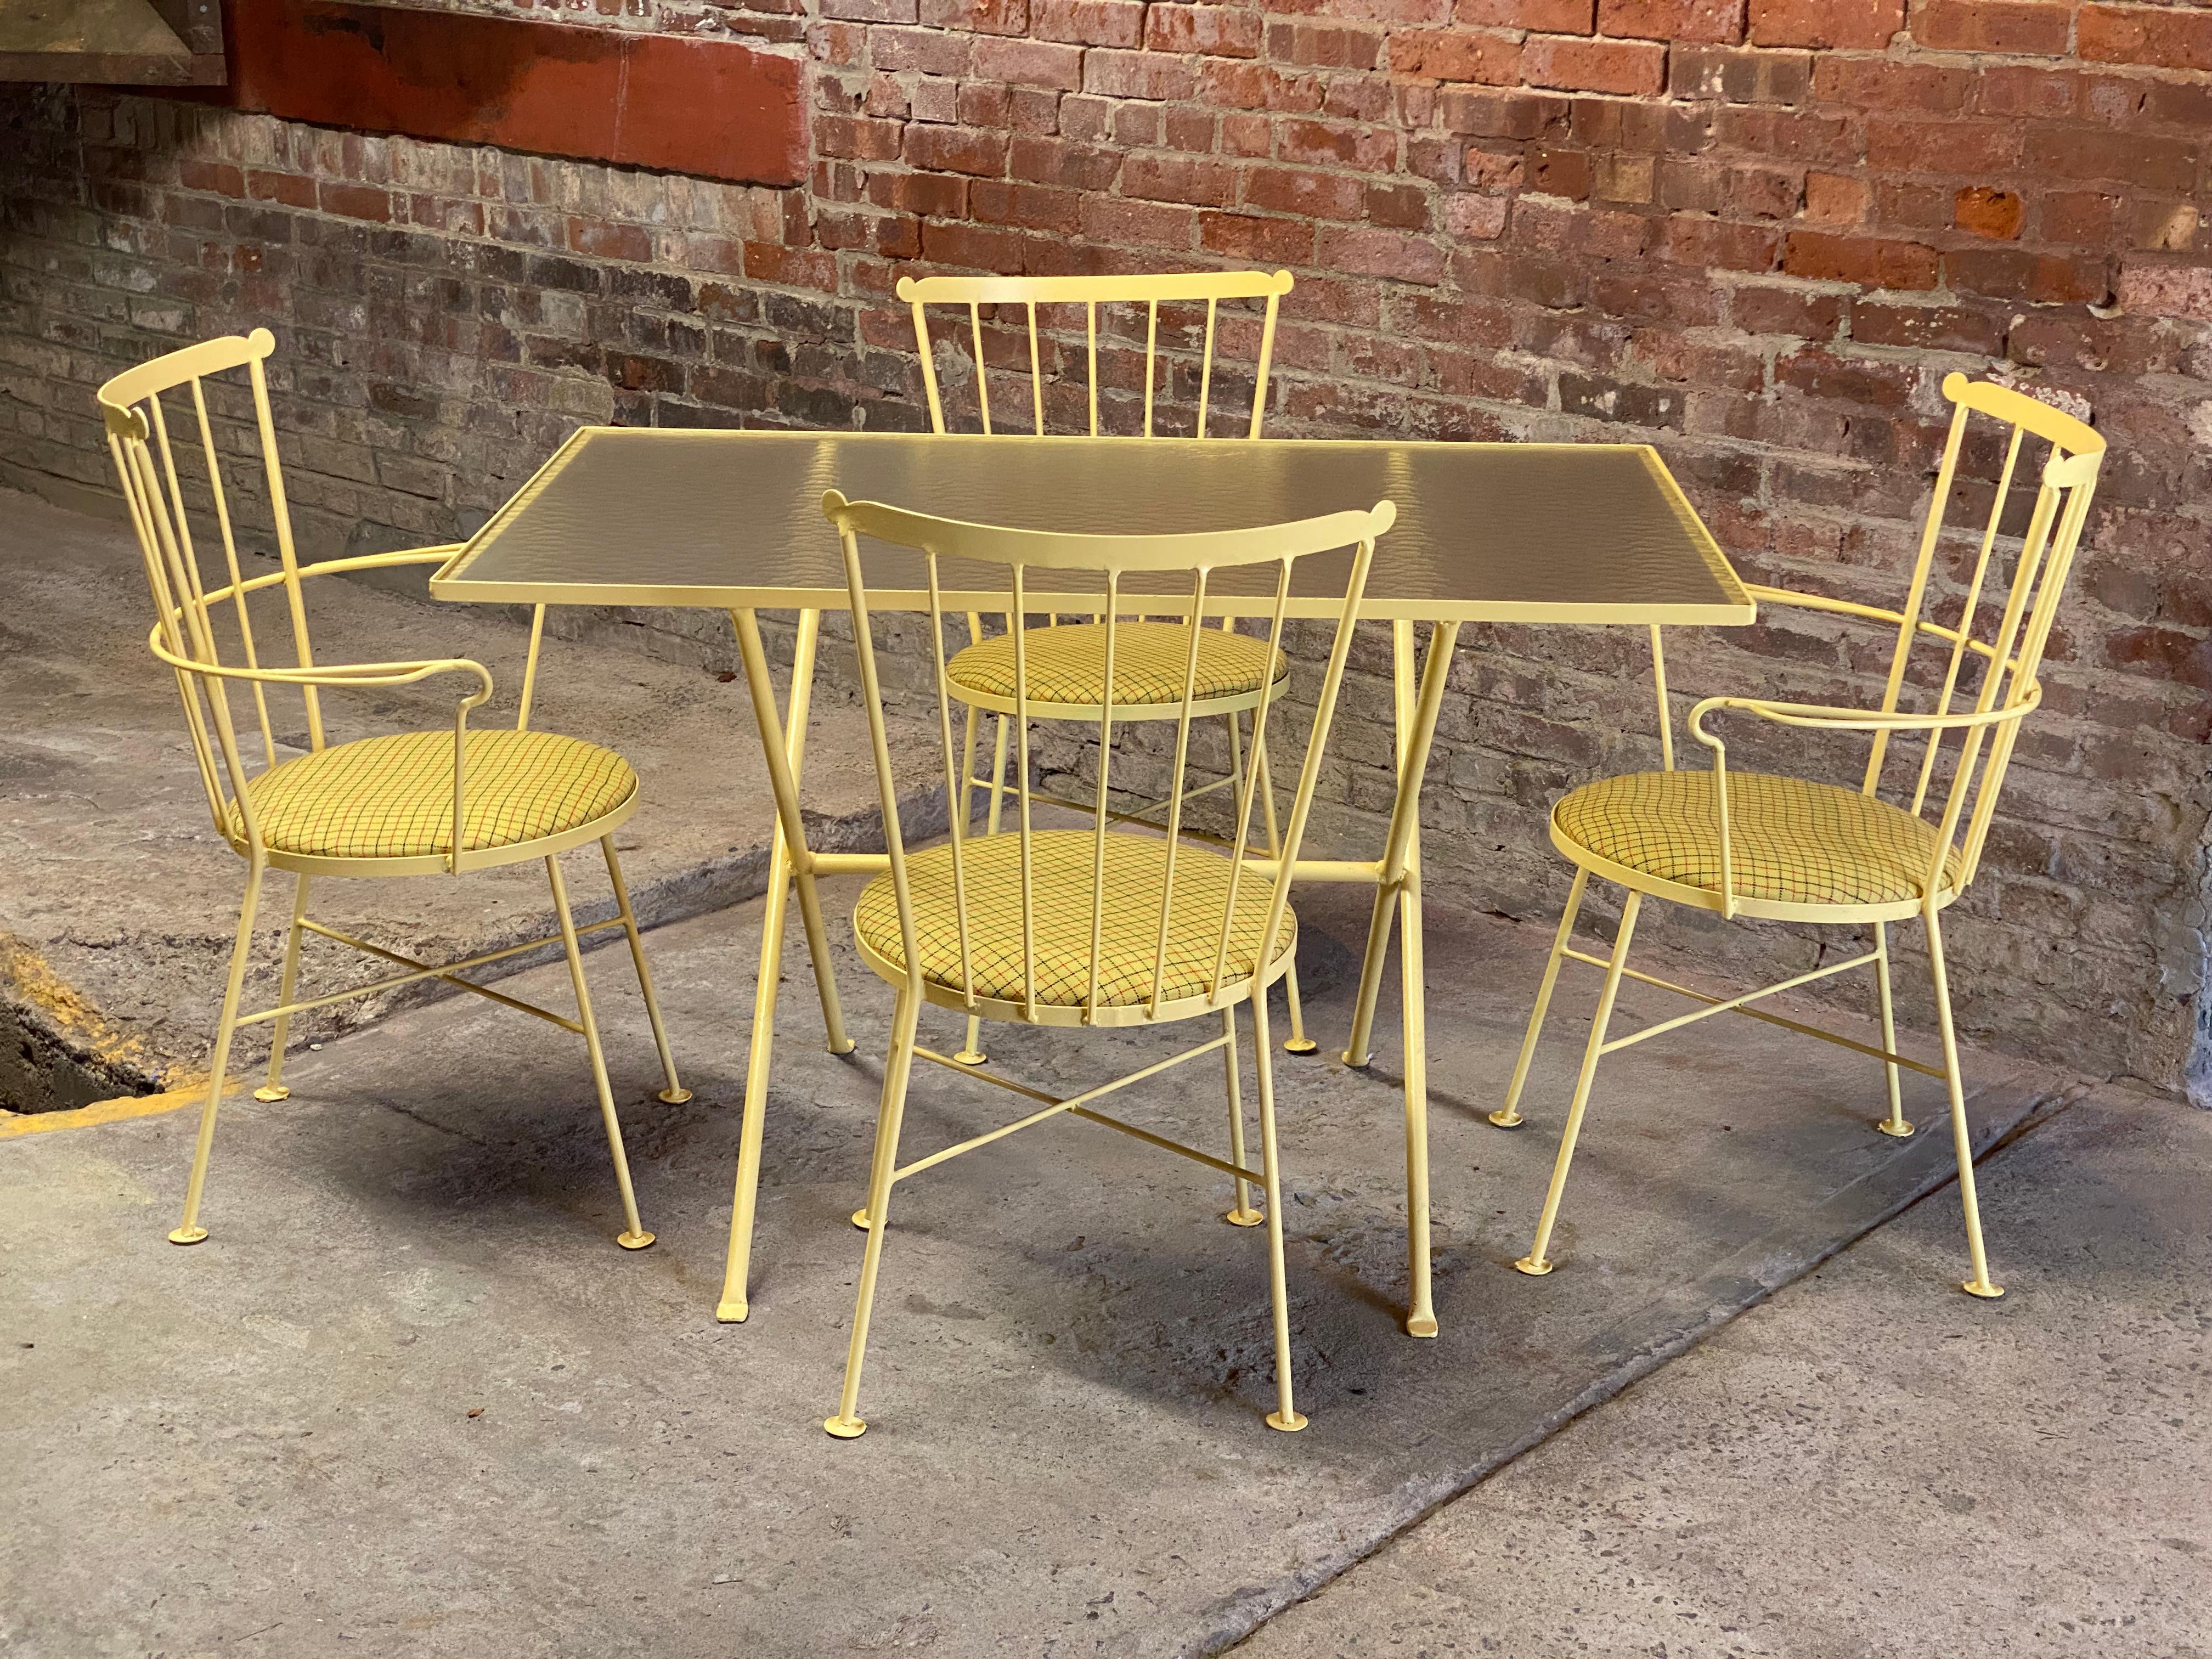 A fresh classic modernist take on the Windsor chair and a trestle base dining table. This set from Gallo Original Iron Works features two arm chairs and two side chairs with a trestle base table with the original textured wavy glass top. Circa